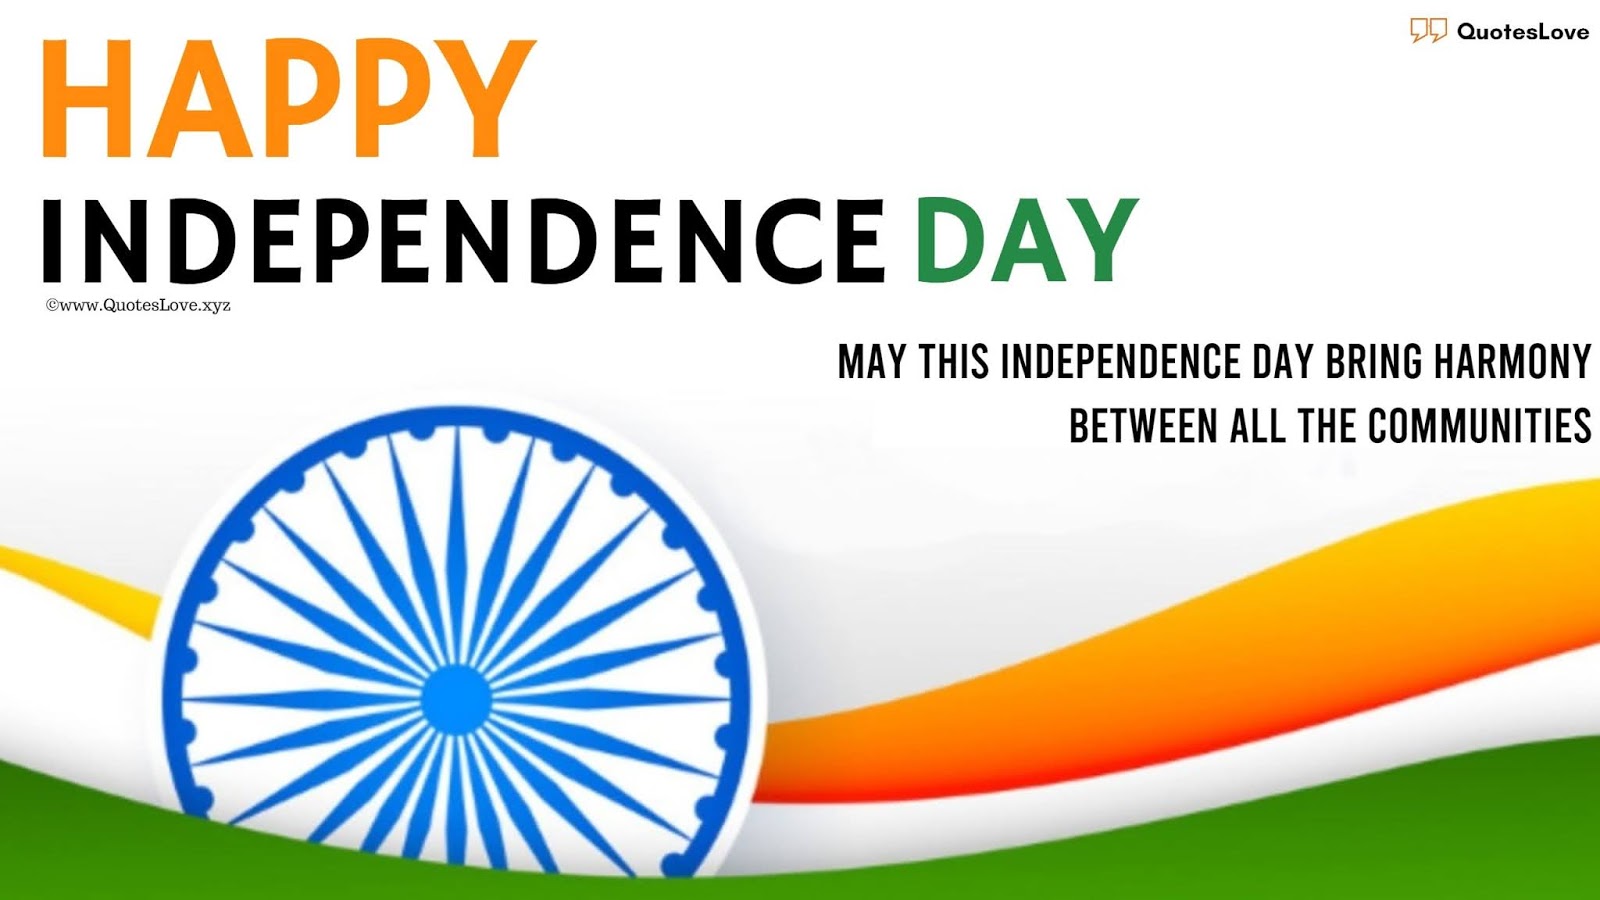 [Best] 15 August: Happy Independence Day 2021: Wishes, Quotes, Messages, Image, Picture, Poster, Wallpaper